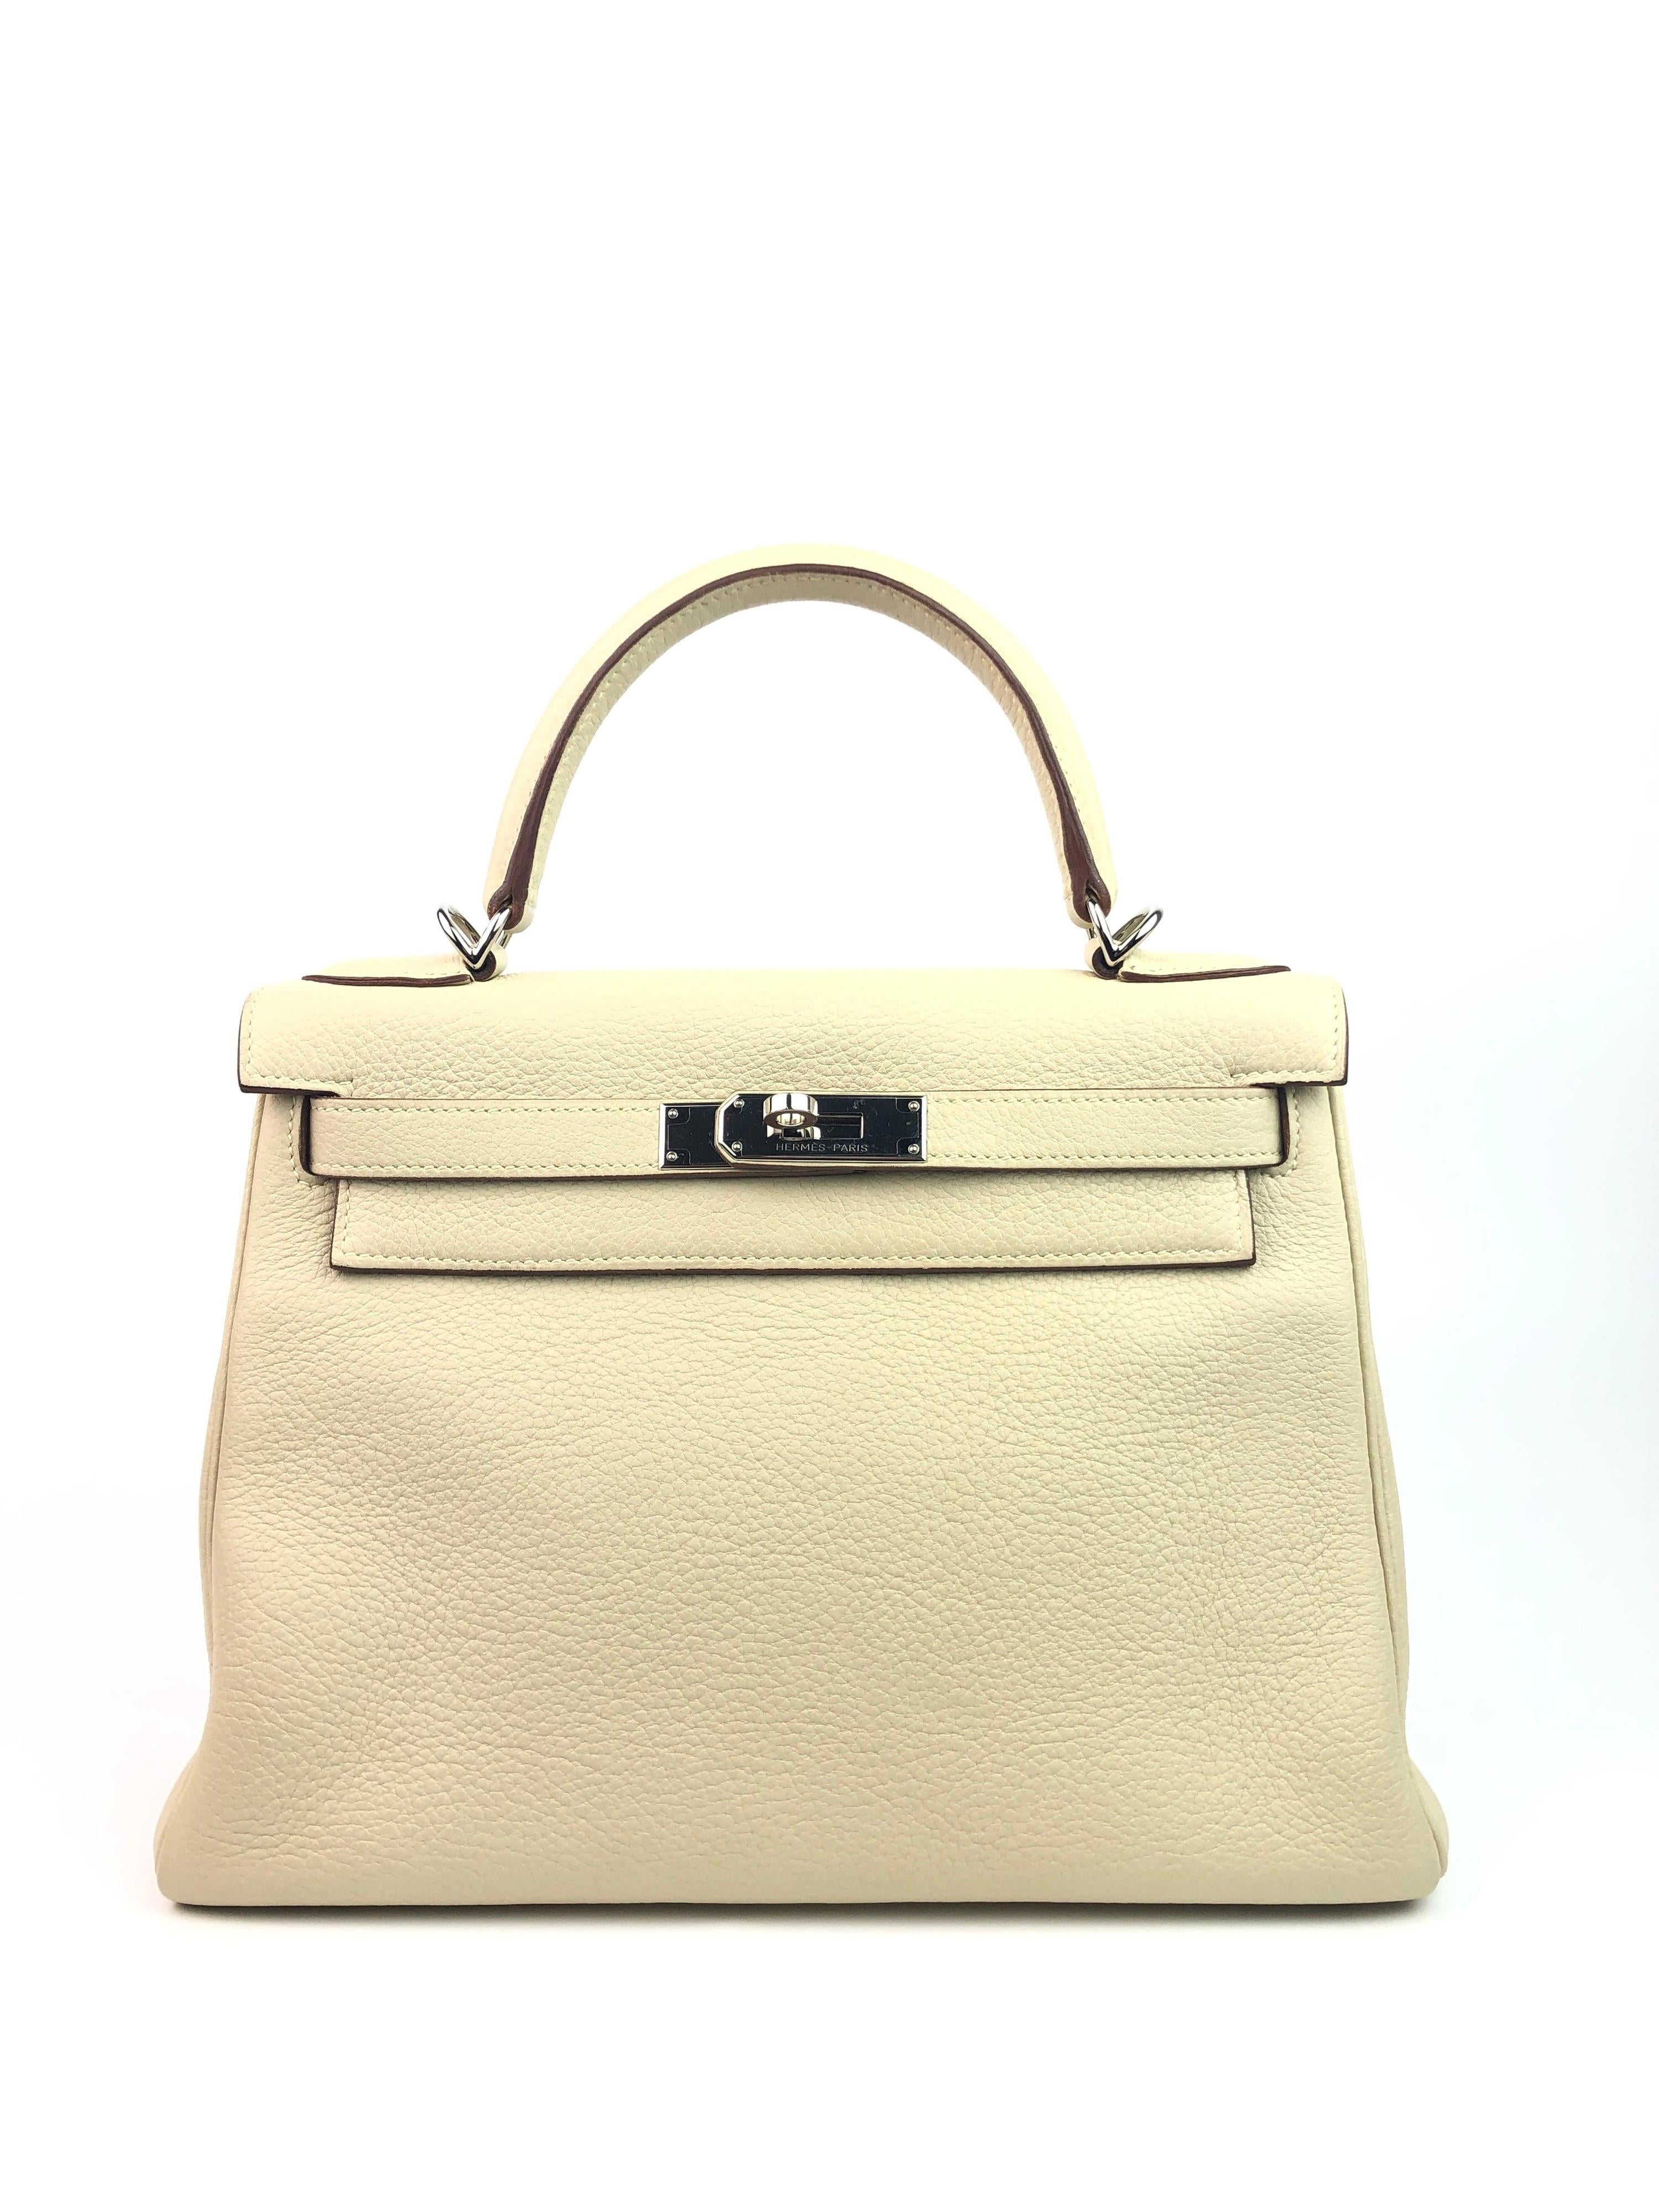 Hermes Kelly 28 Parchemin Palladium Hardware . Excellent Pristine Condition, Plastic on Hardware, perfect corners and excellent structure. 

Shop with confidence from Lux Addicts. Authenticity guaranteed or money back.
